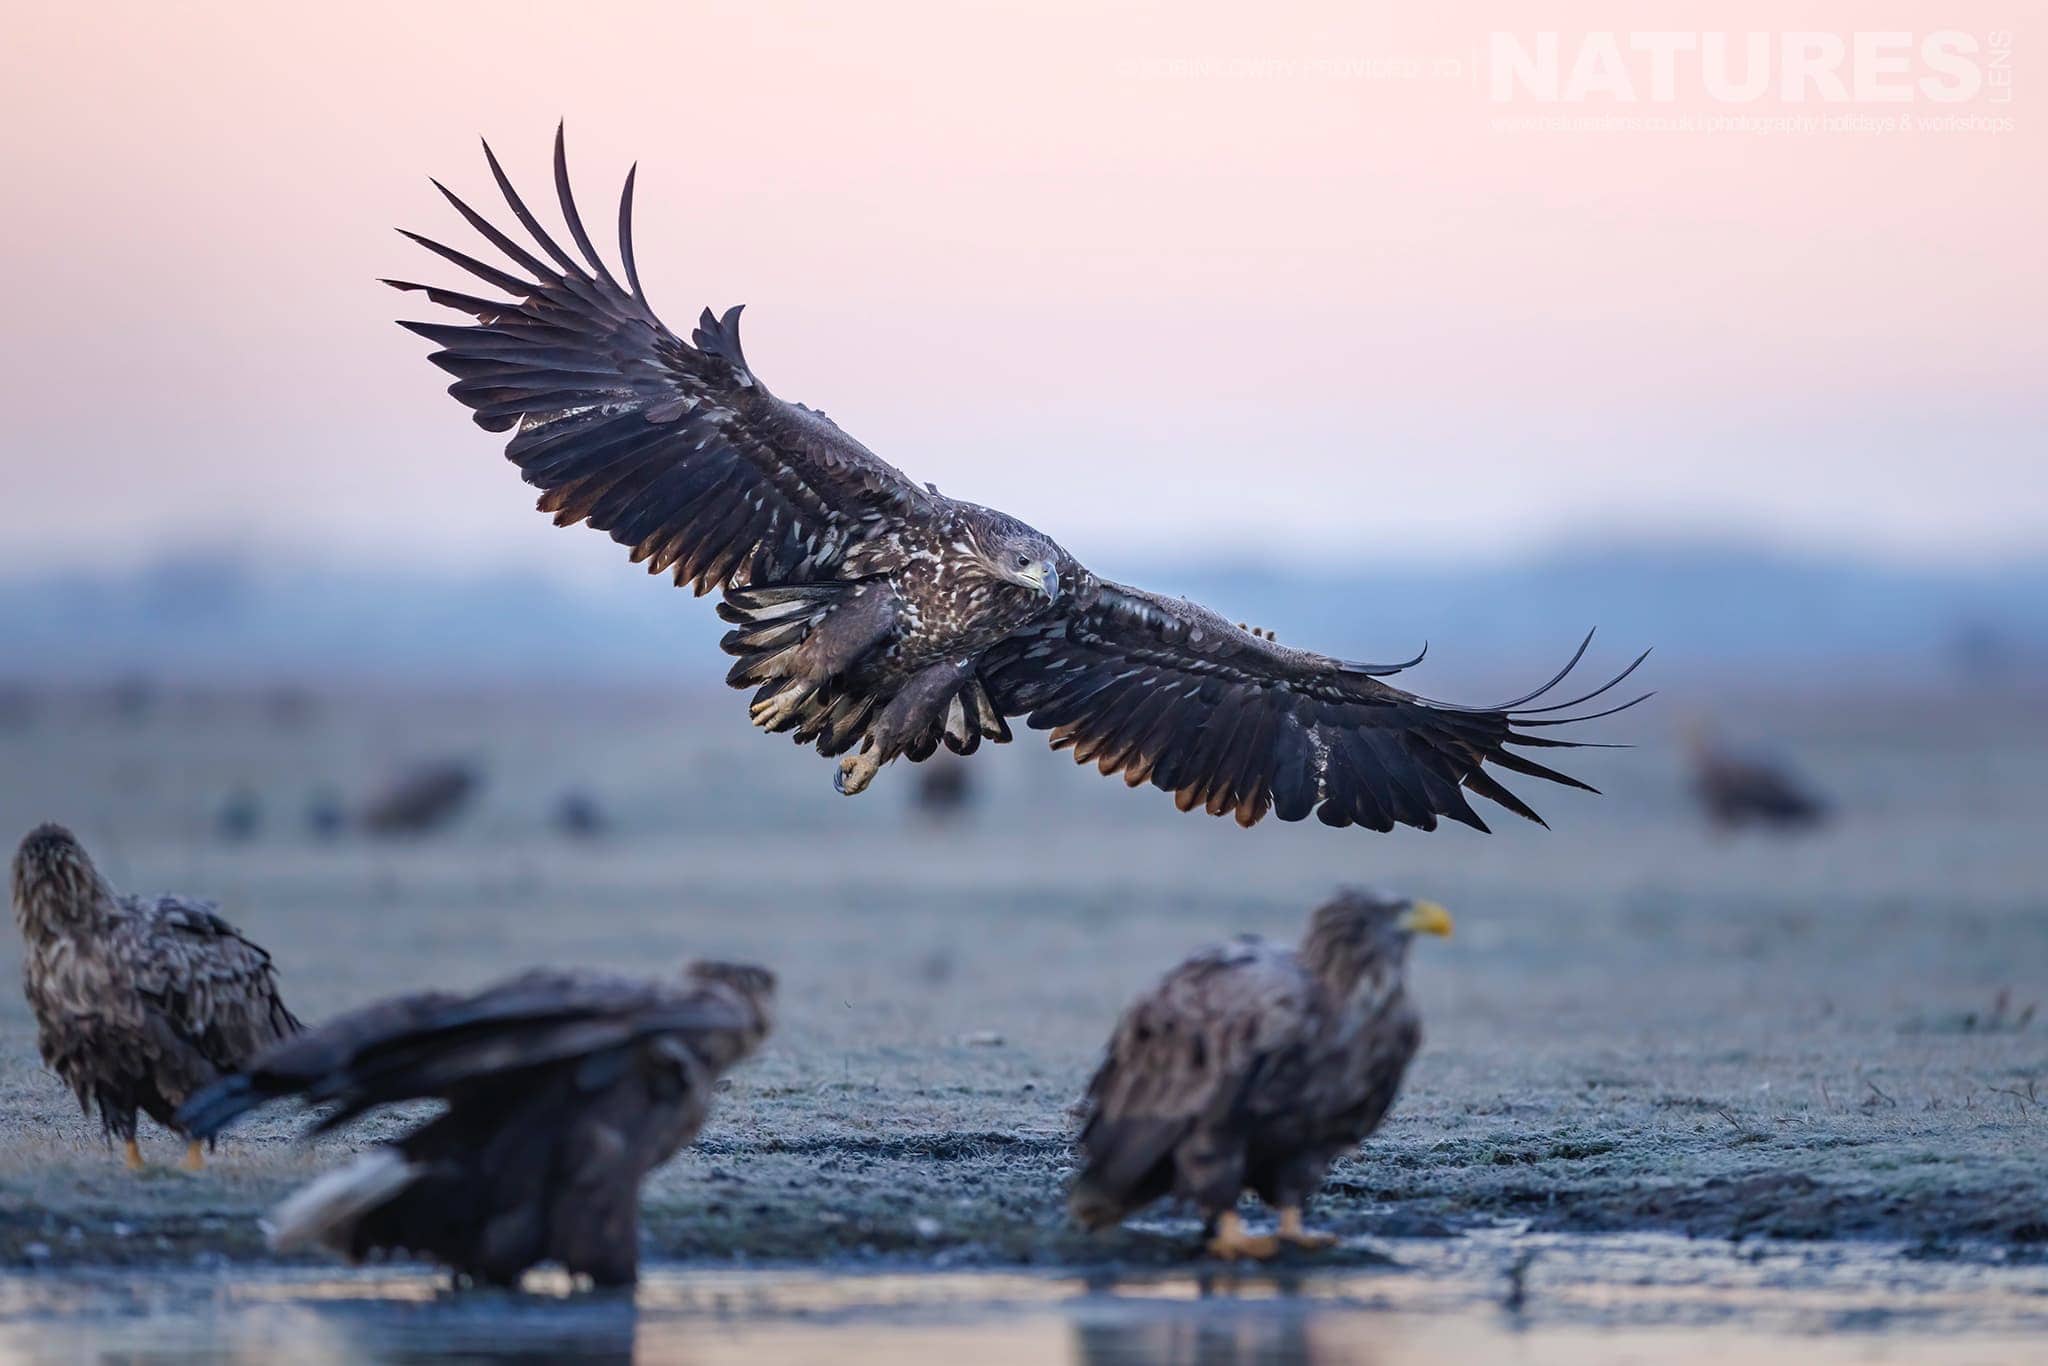 A White Tailed Eagle Comes In To Land The Largest Bird Species Found Amongst The Wildlife Of The Hortobágy National Park In Hungary